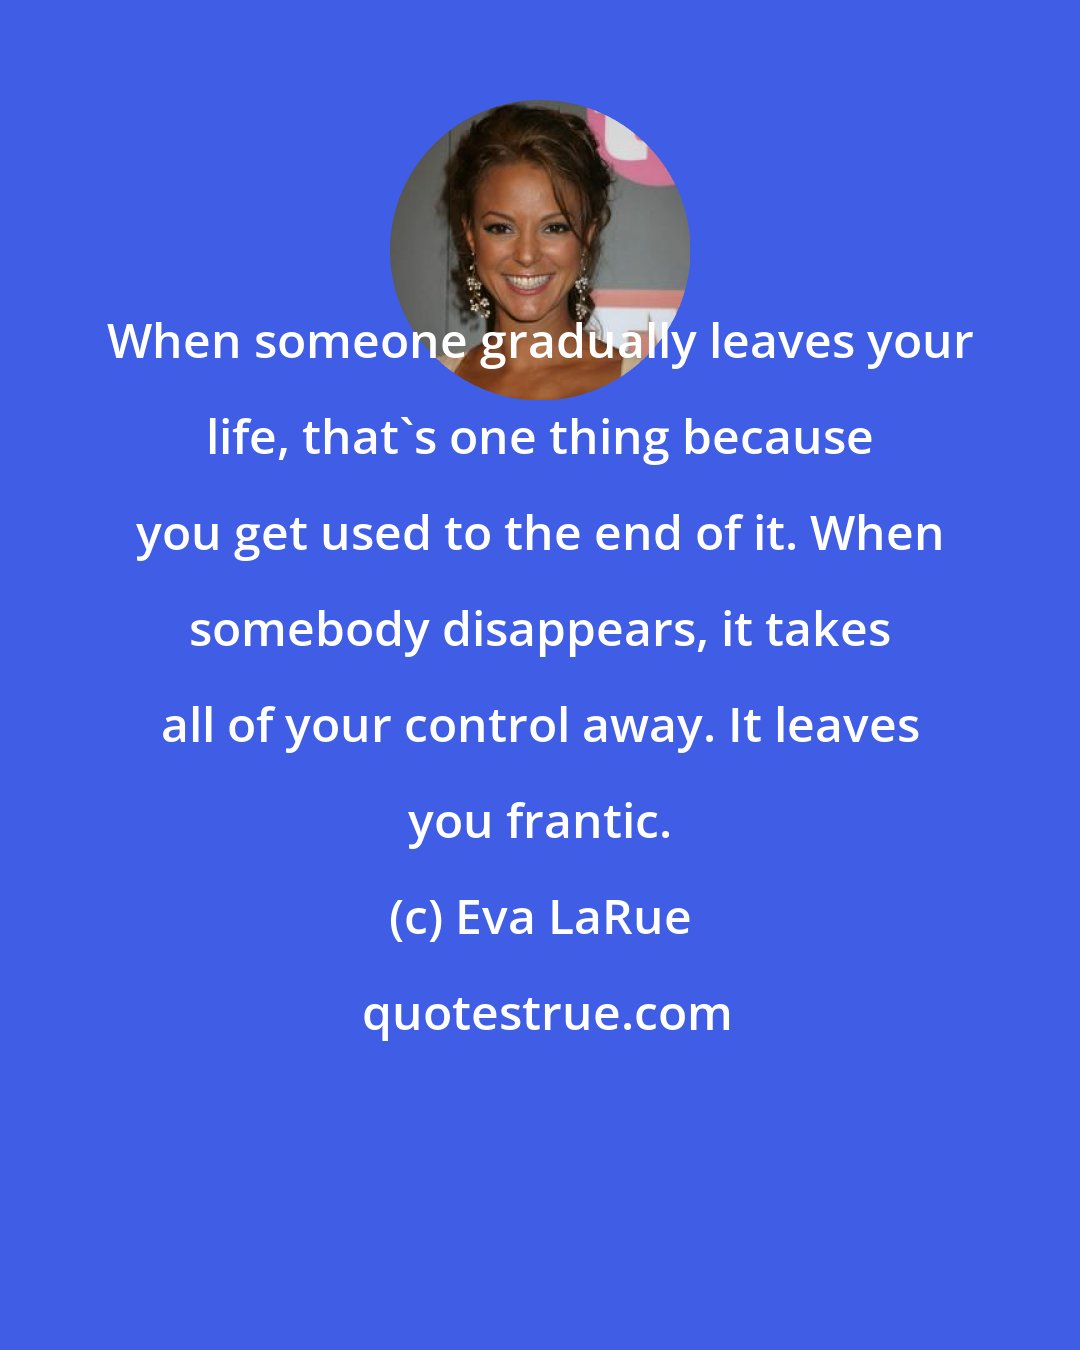 Eva LaRue: When someone gradually leaves your life, that's one thing because you get used to the end of it. When somebody disappears, it takes all of your control away. It leaves you frantic.